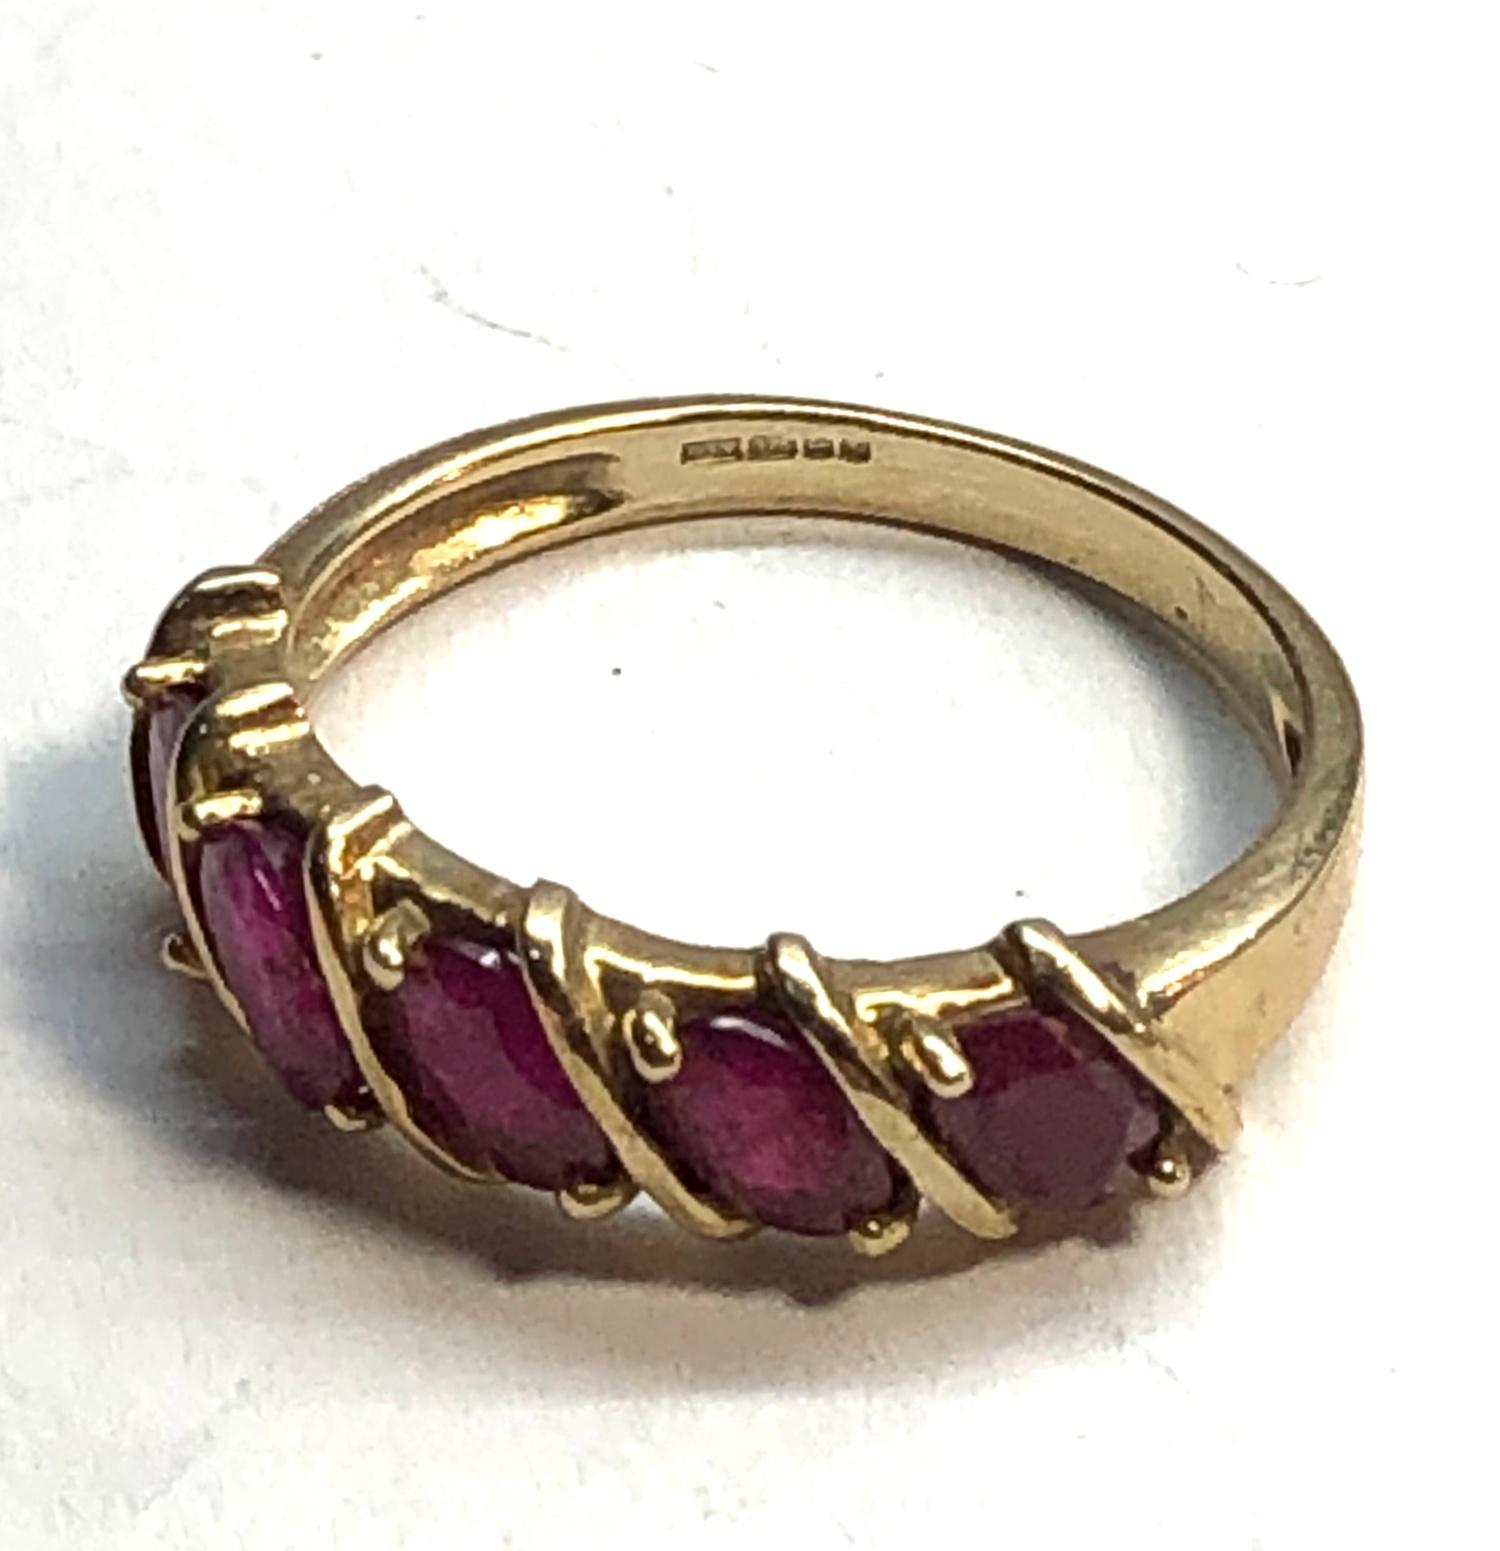 9ct Gold stone set dress ring weight 2.5, as shown condition - Image 3 of 5